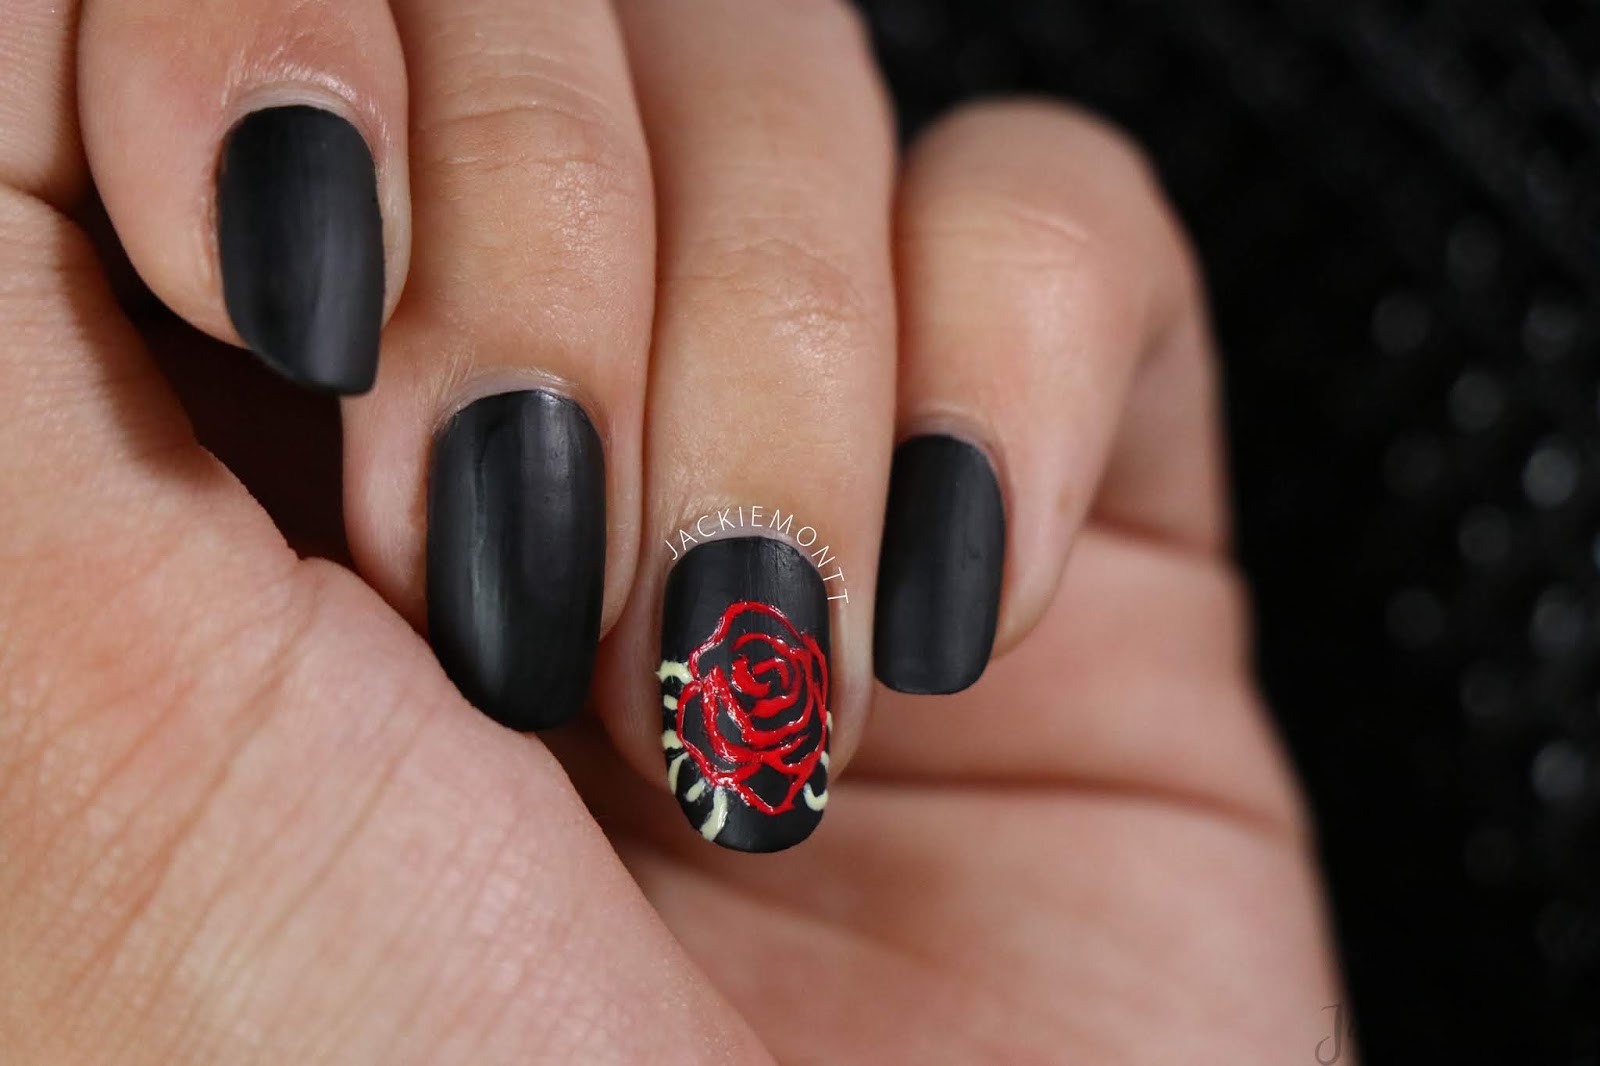 3. "Elegant Rose Nail Design with Crystal Accents" - wide 9